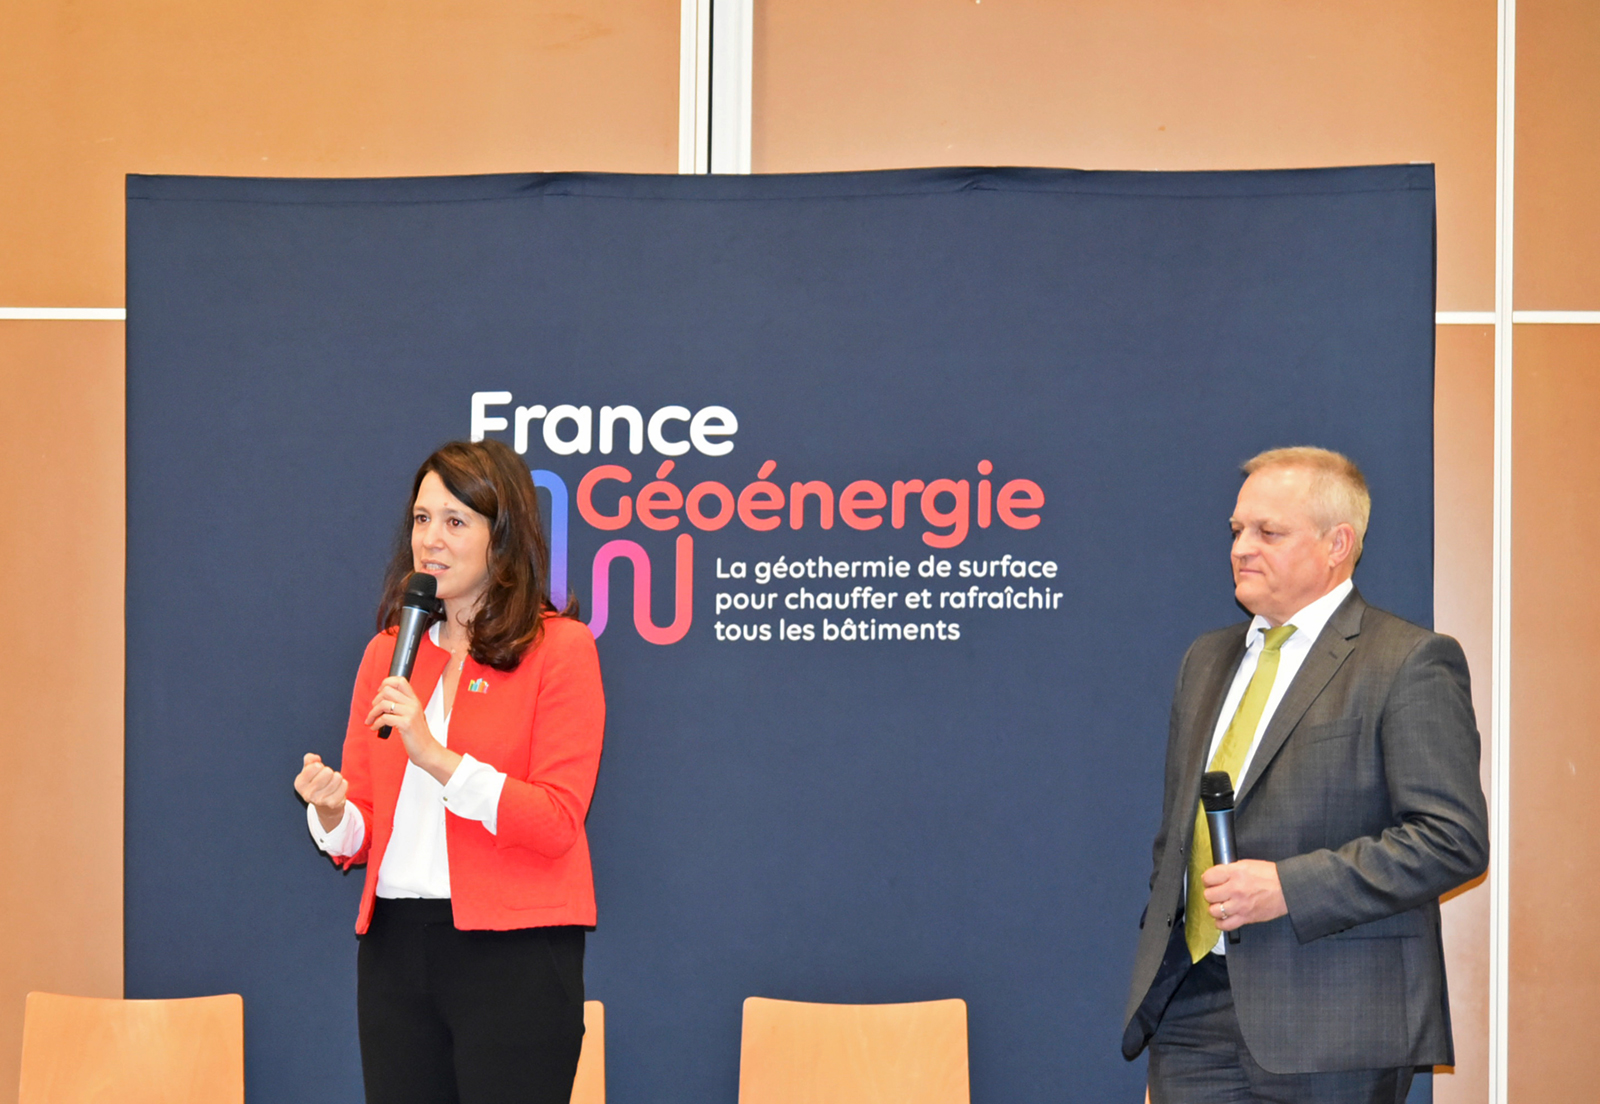 Launch of France Géoénergie at the Salon des maires (Mayors’ Convention). This local-authority-driven initiative aims to accelerate the deployment of near-surface geothermal energy. © BRGM